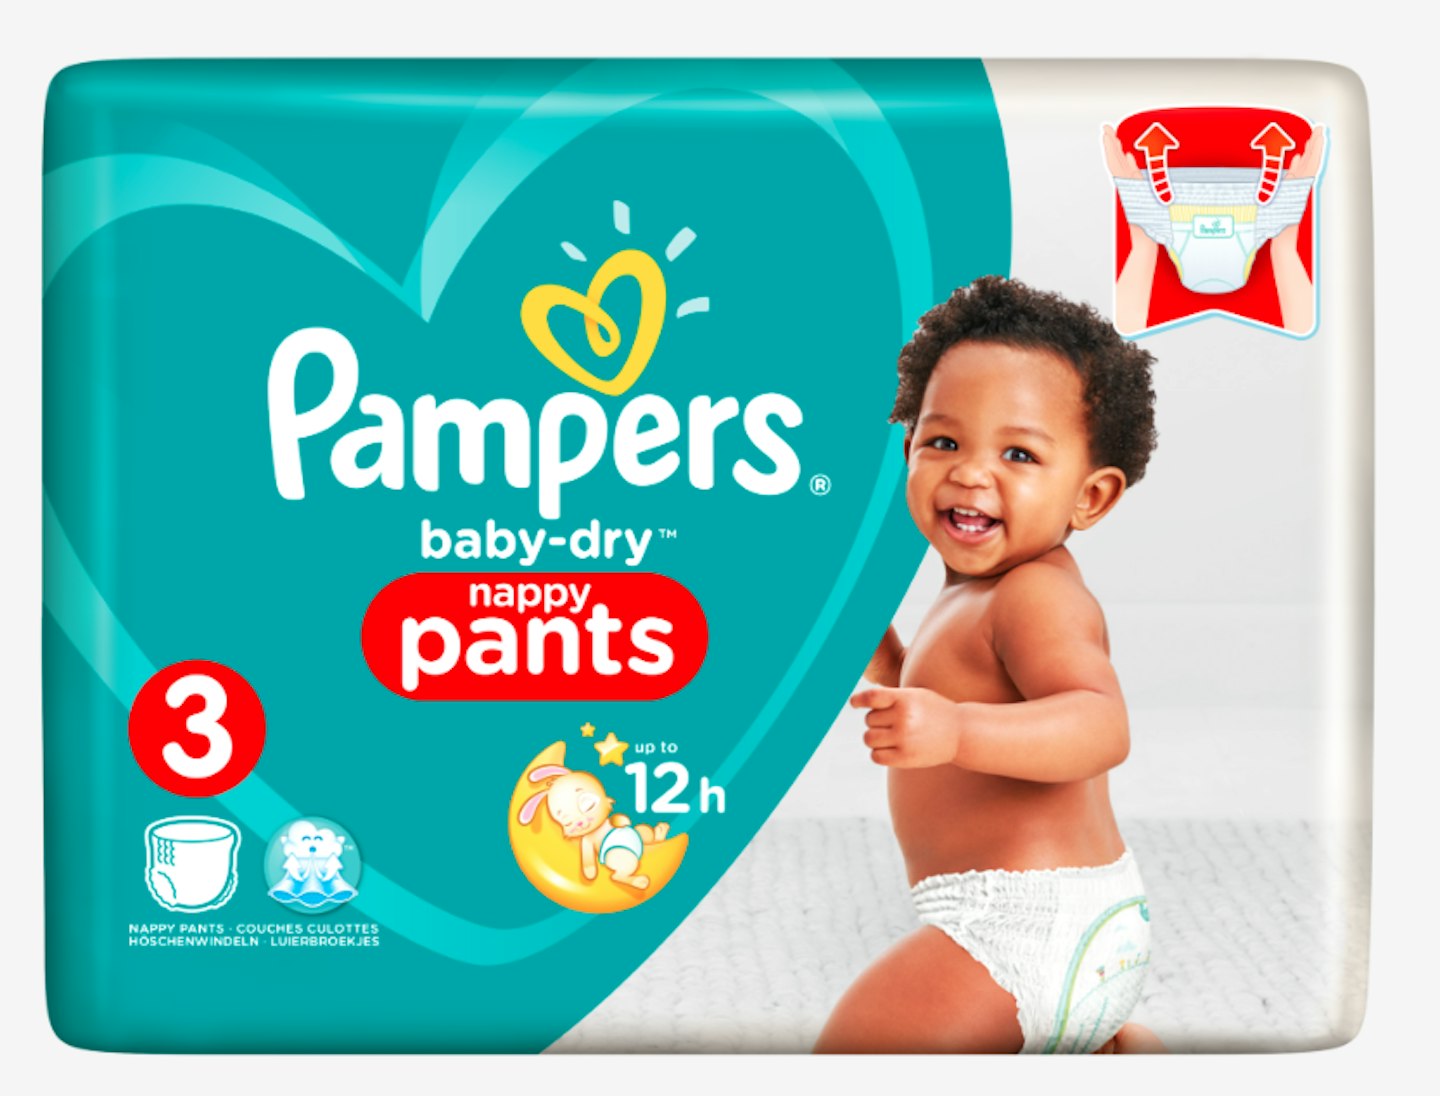 Pampers Baby Dry Nappies and Nappy Pants